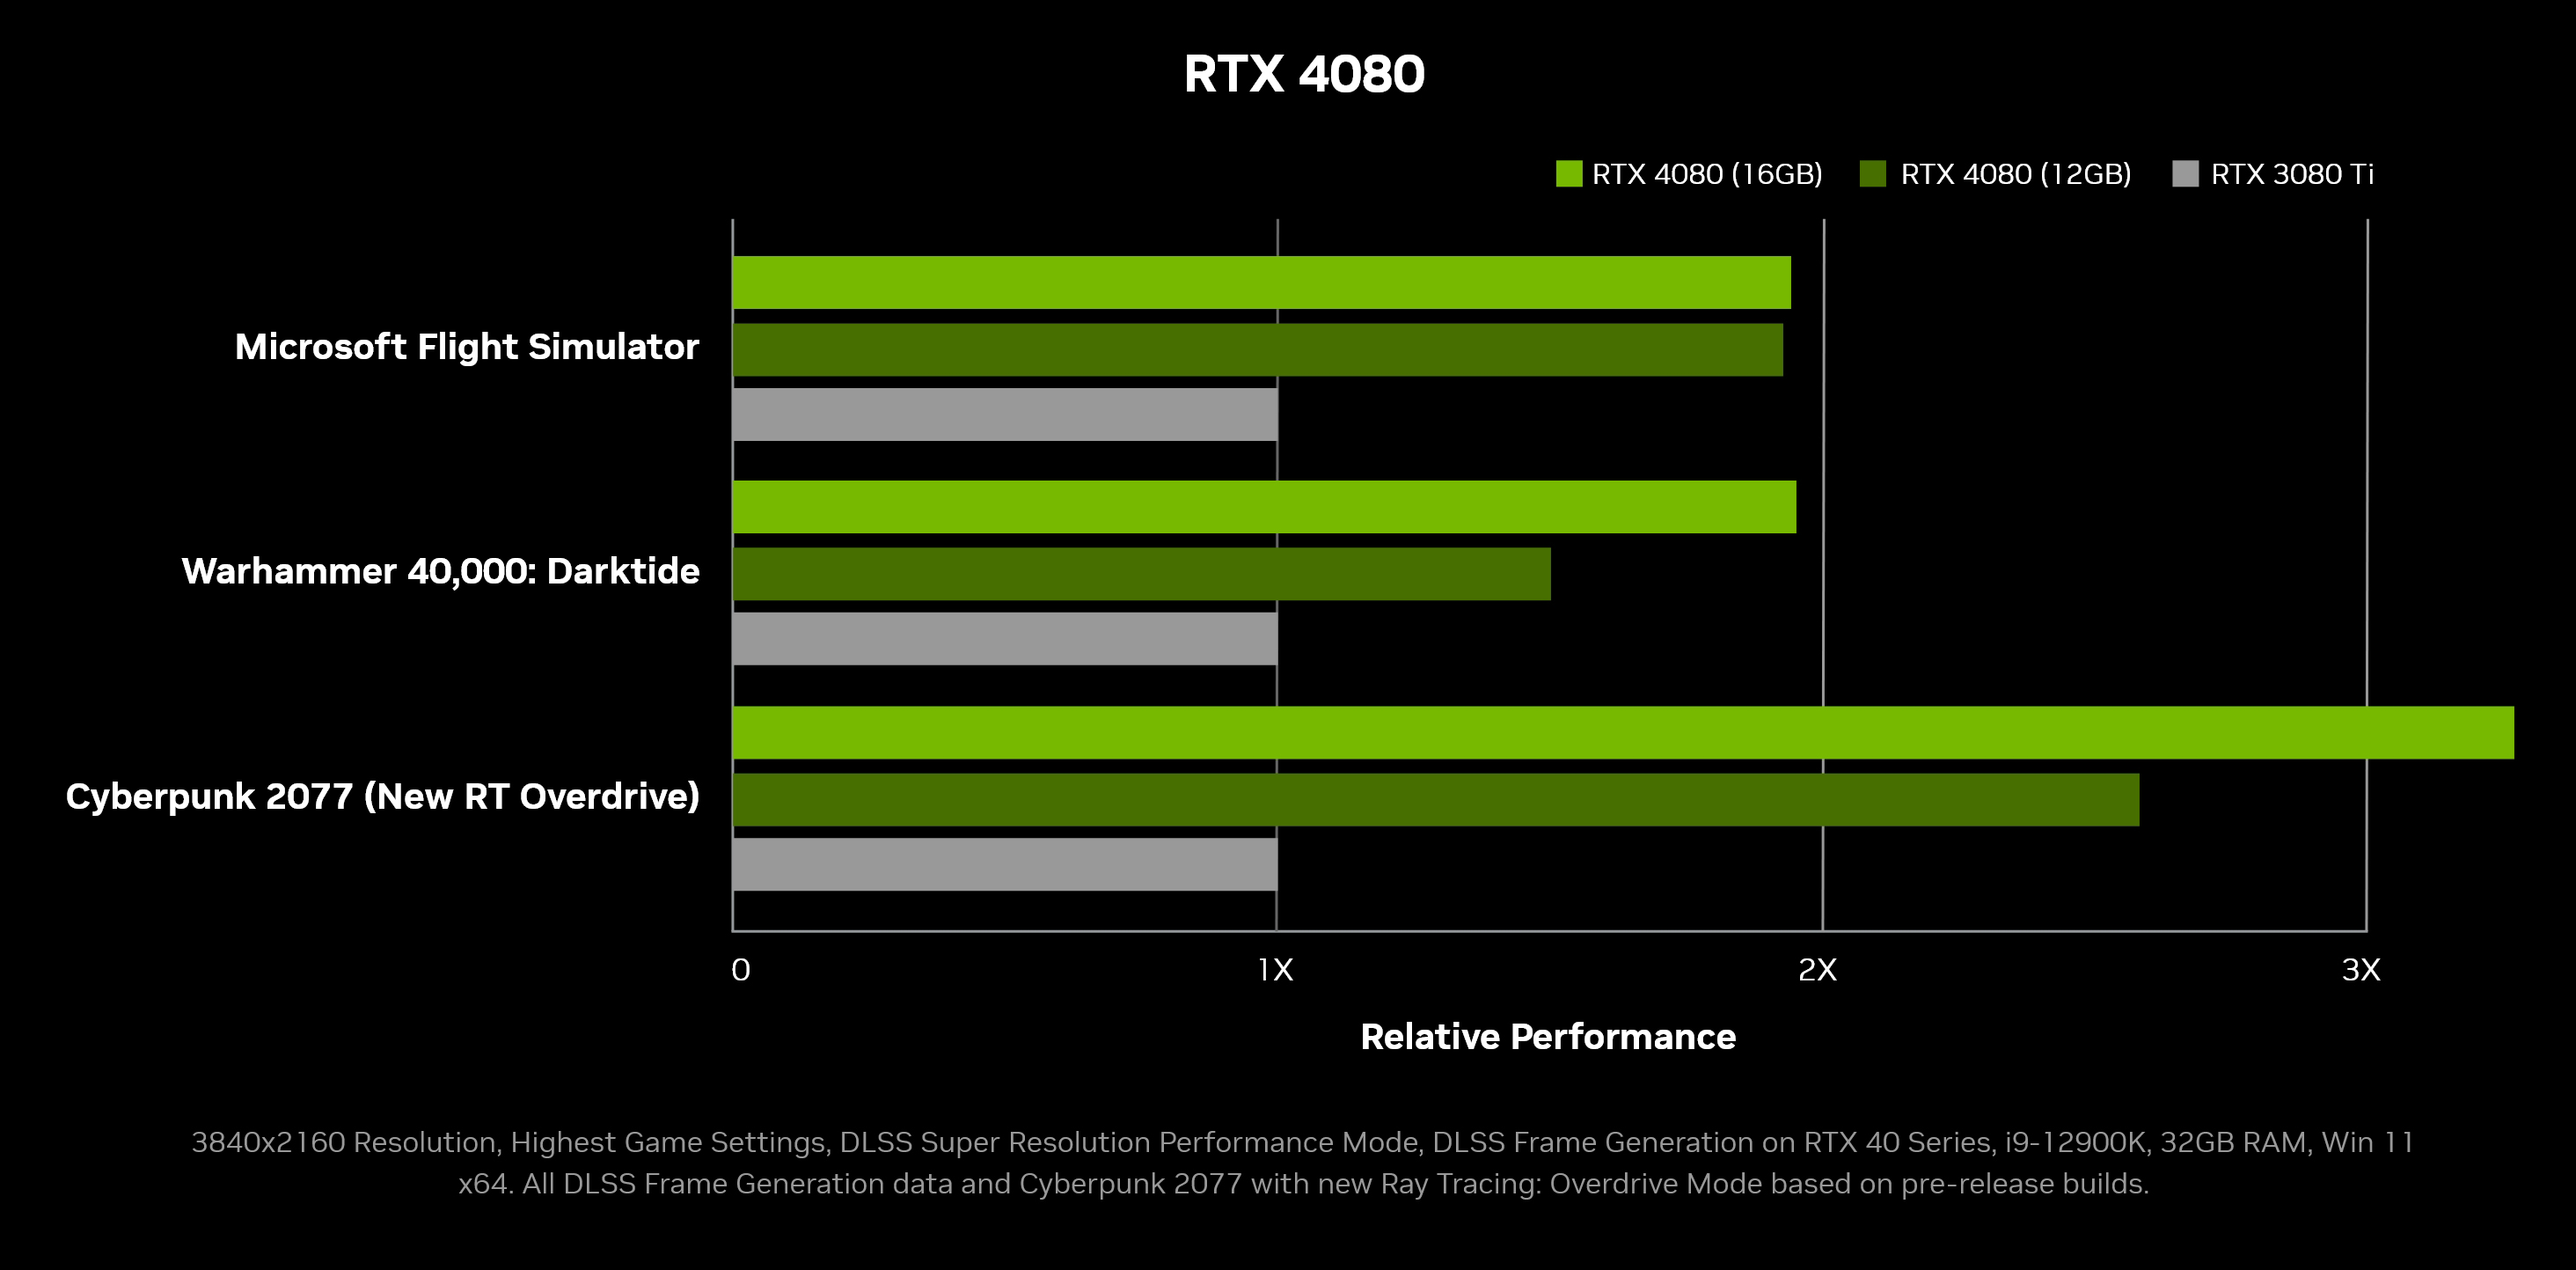 Rumored Nvidia RTX 4080 SUPER now spotted on a hardware repository